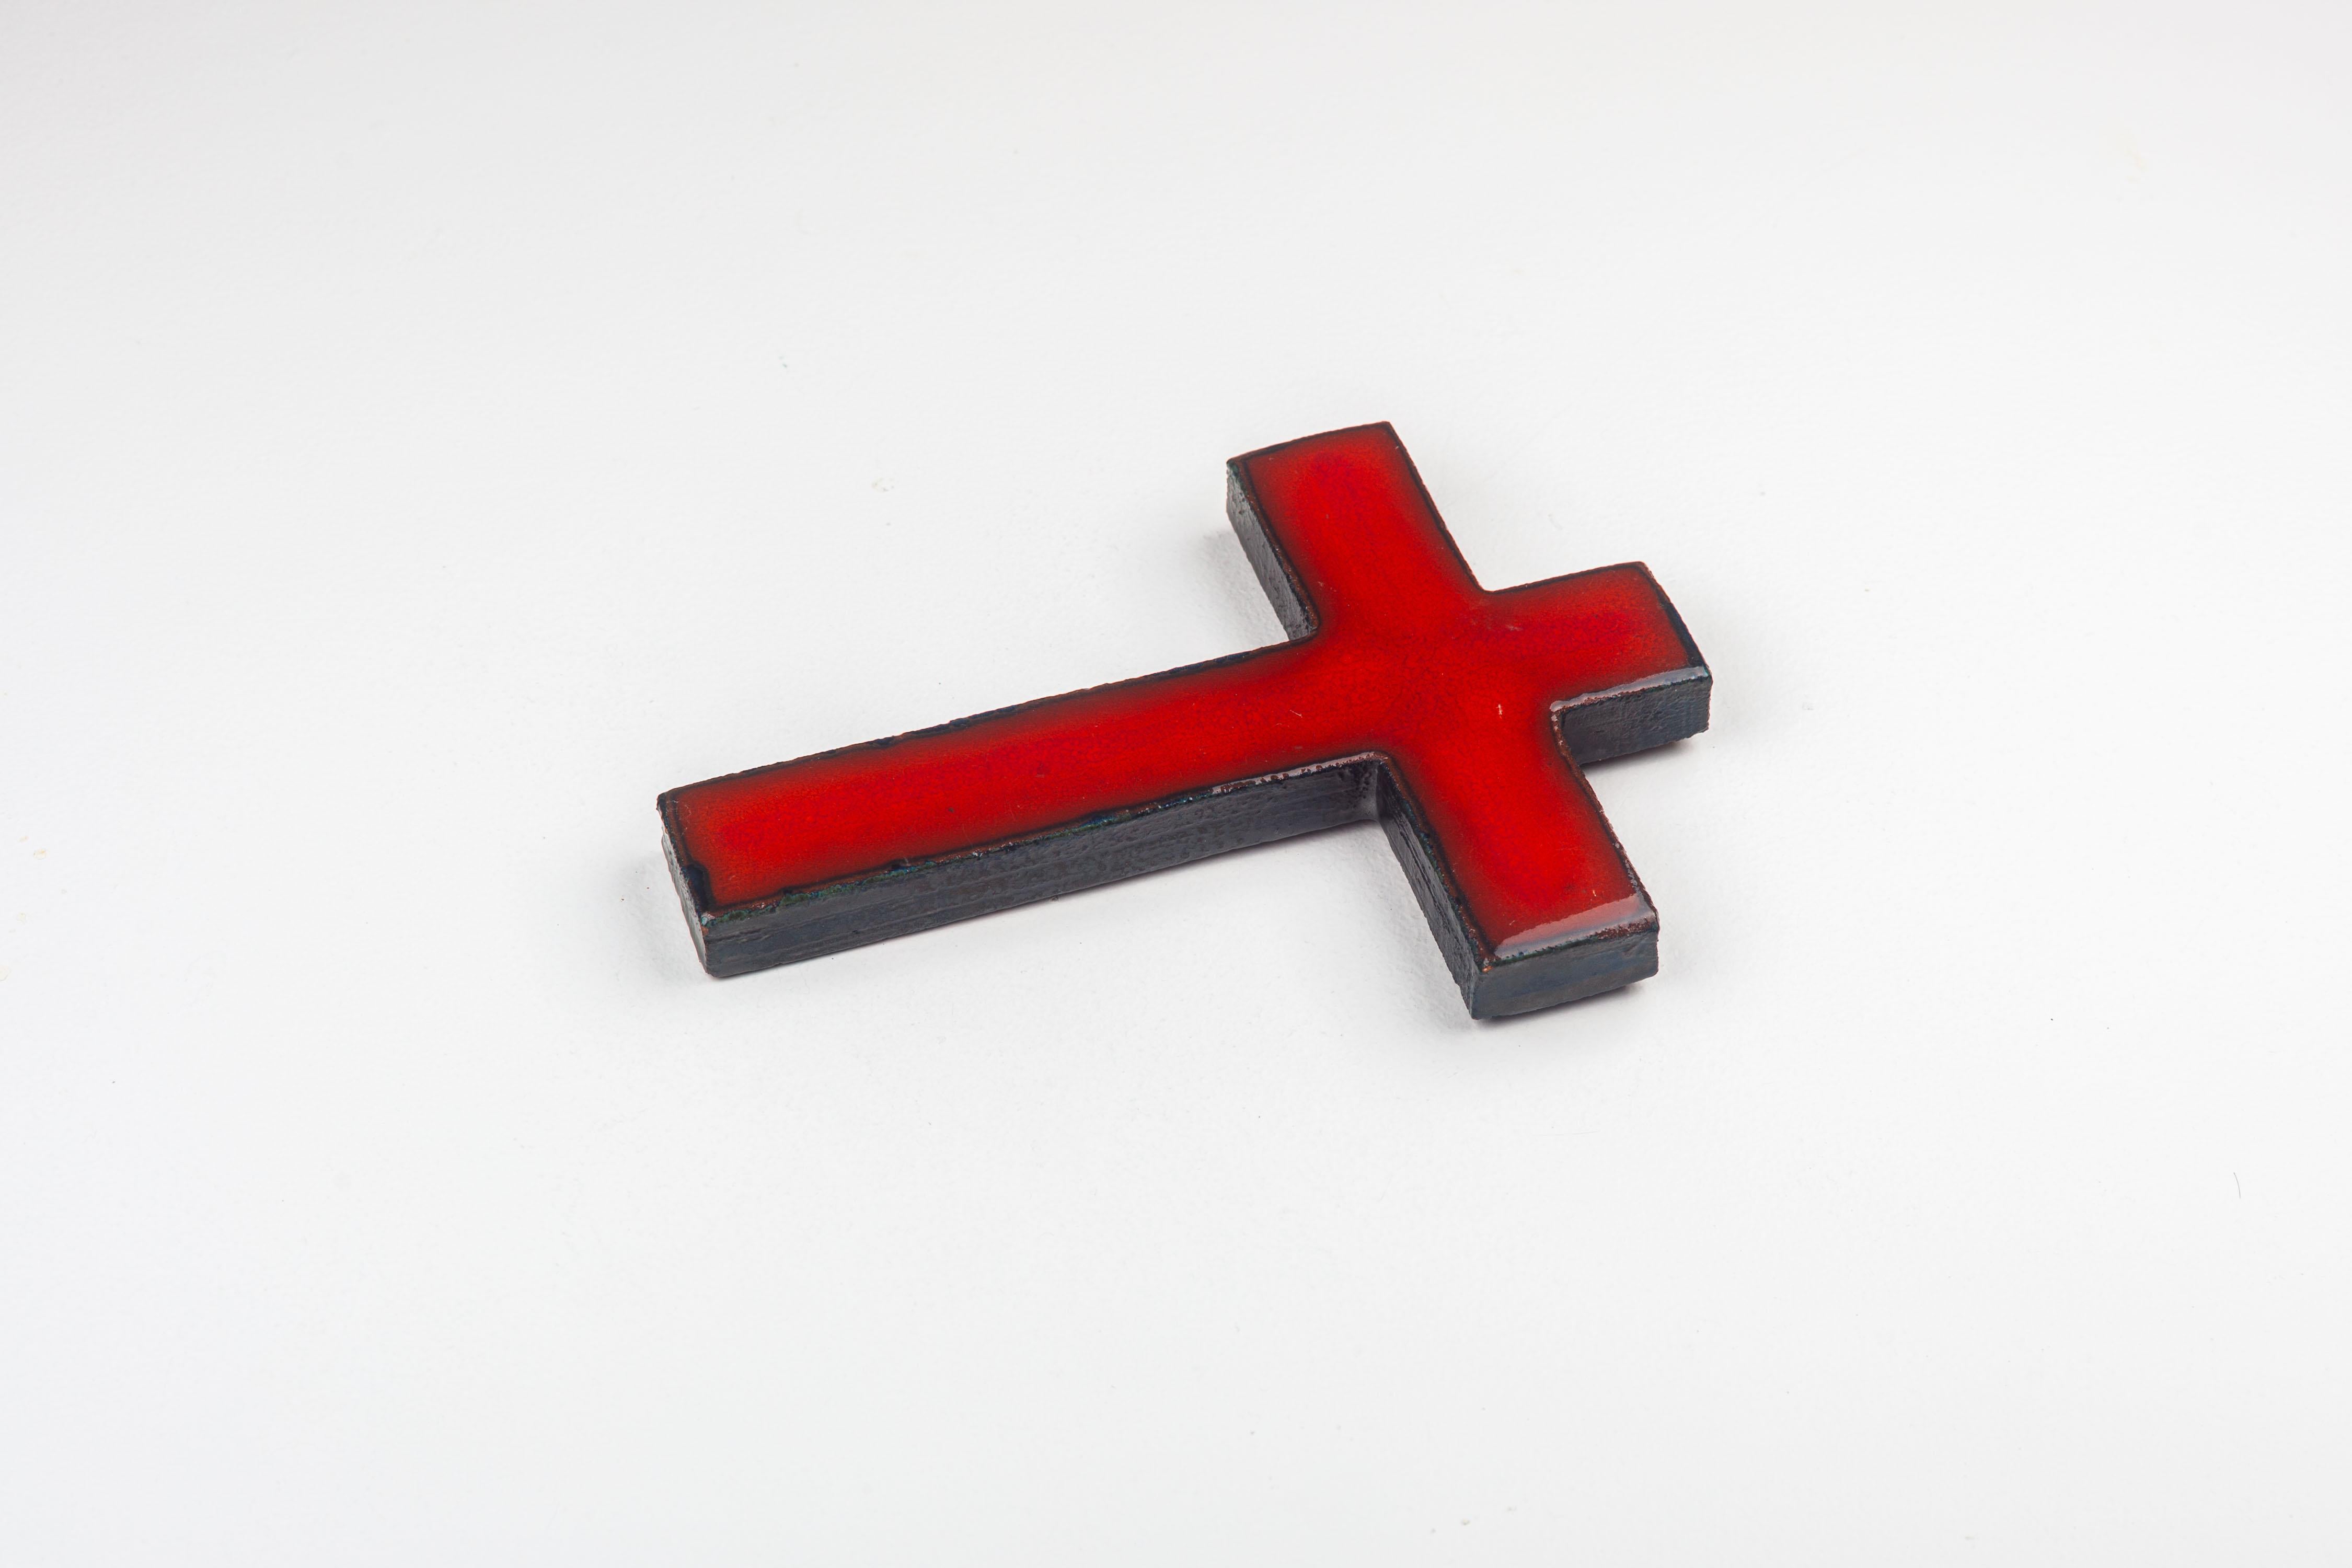 This mid-century modern ceramic cross is a great example of post-war European studio pottery, an art form that embraced both functional and abstract aesthetic principles. The handcrafted piece stands out for its rich, cardinal red glaze—a color